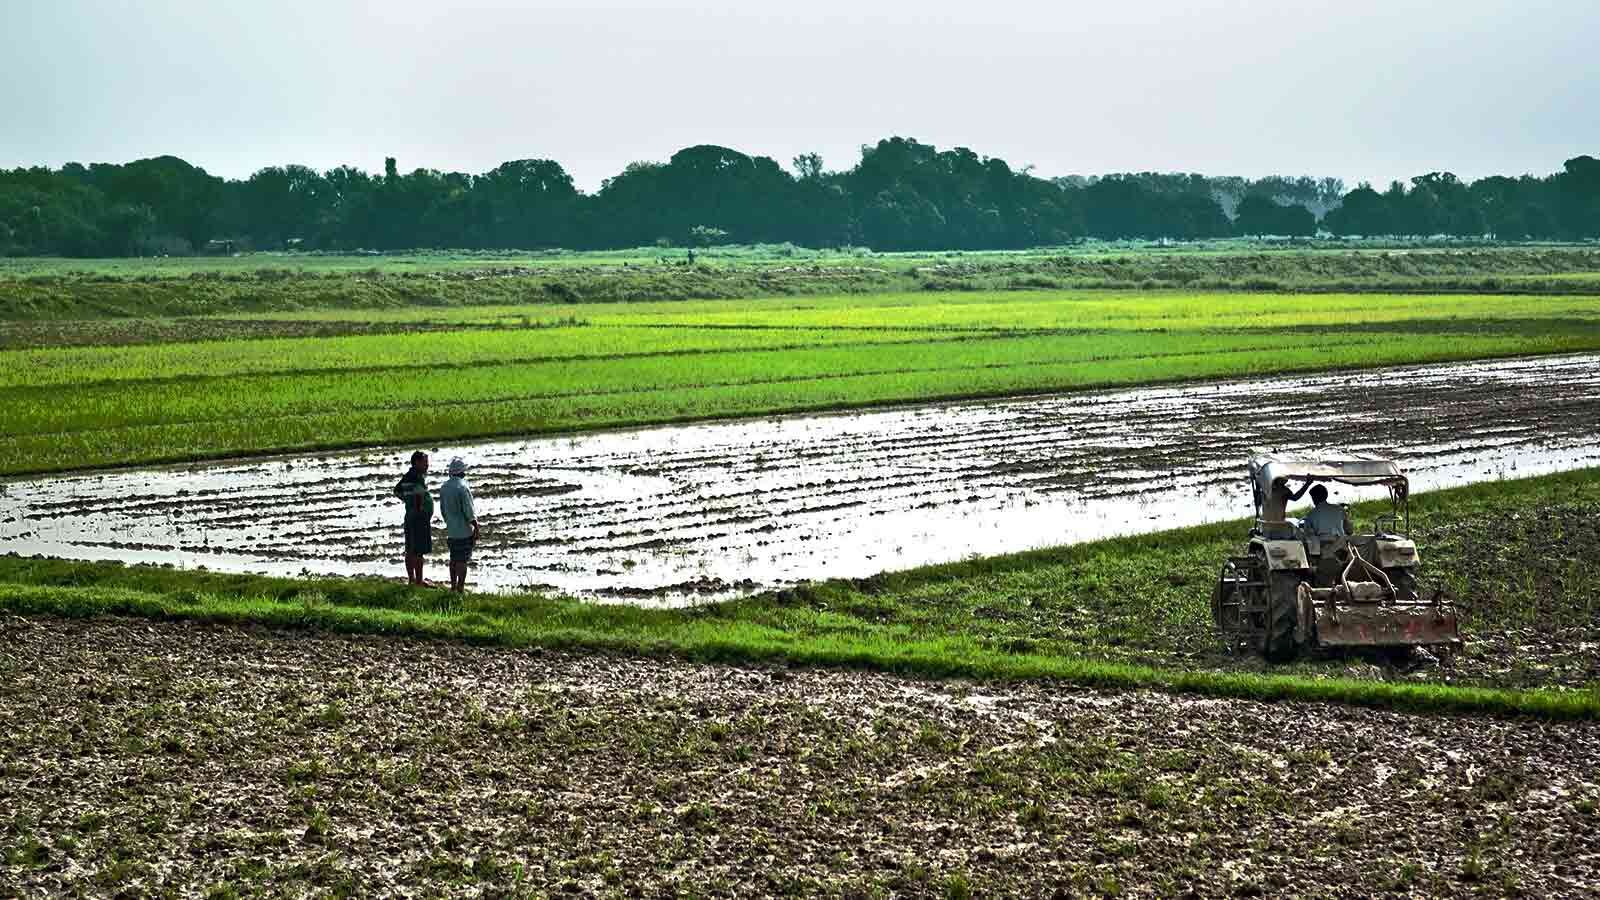 in 12 years, 11 states changed land ceiling laws in favour of industry over farmers